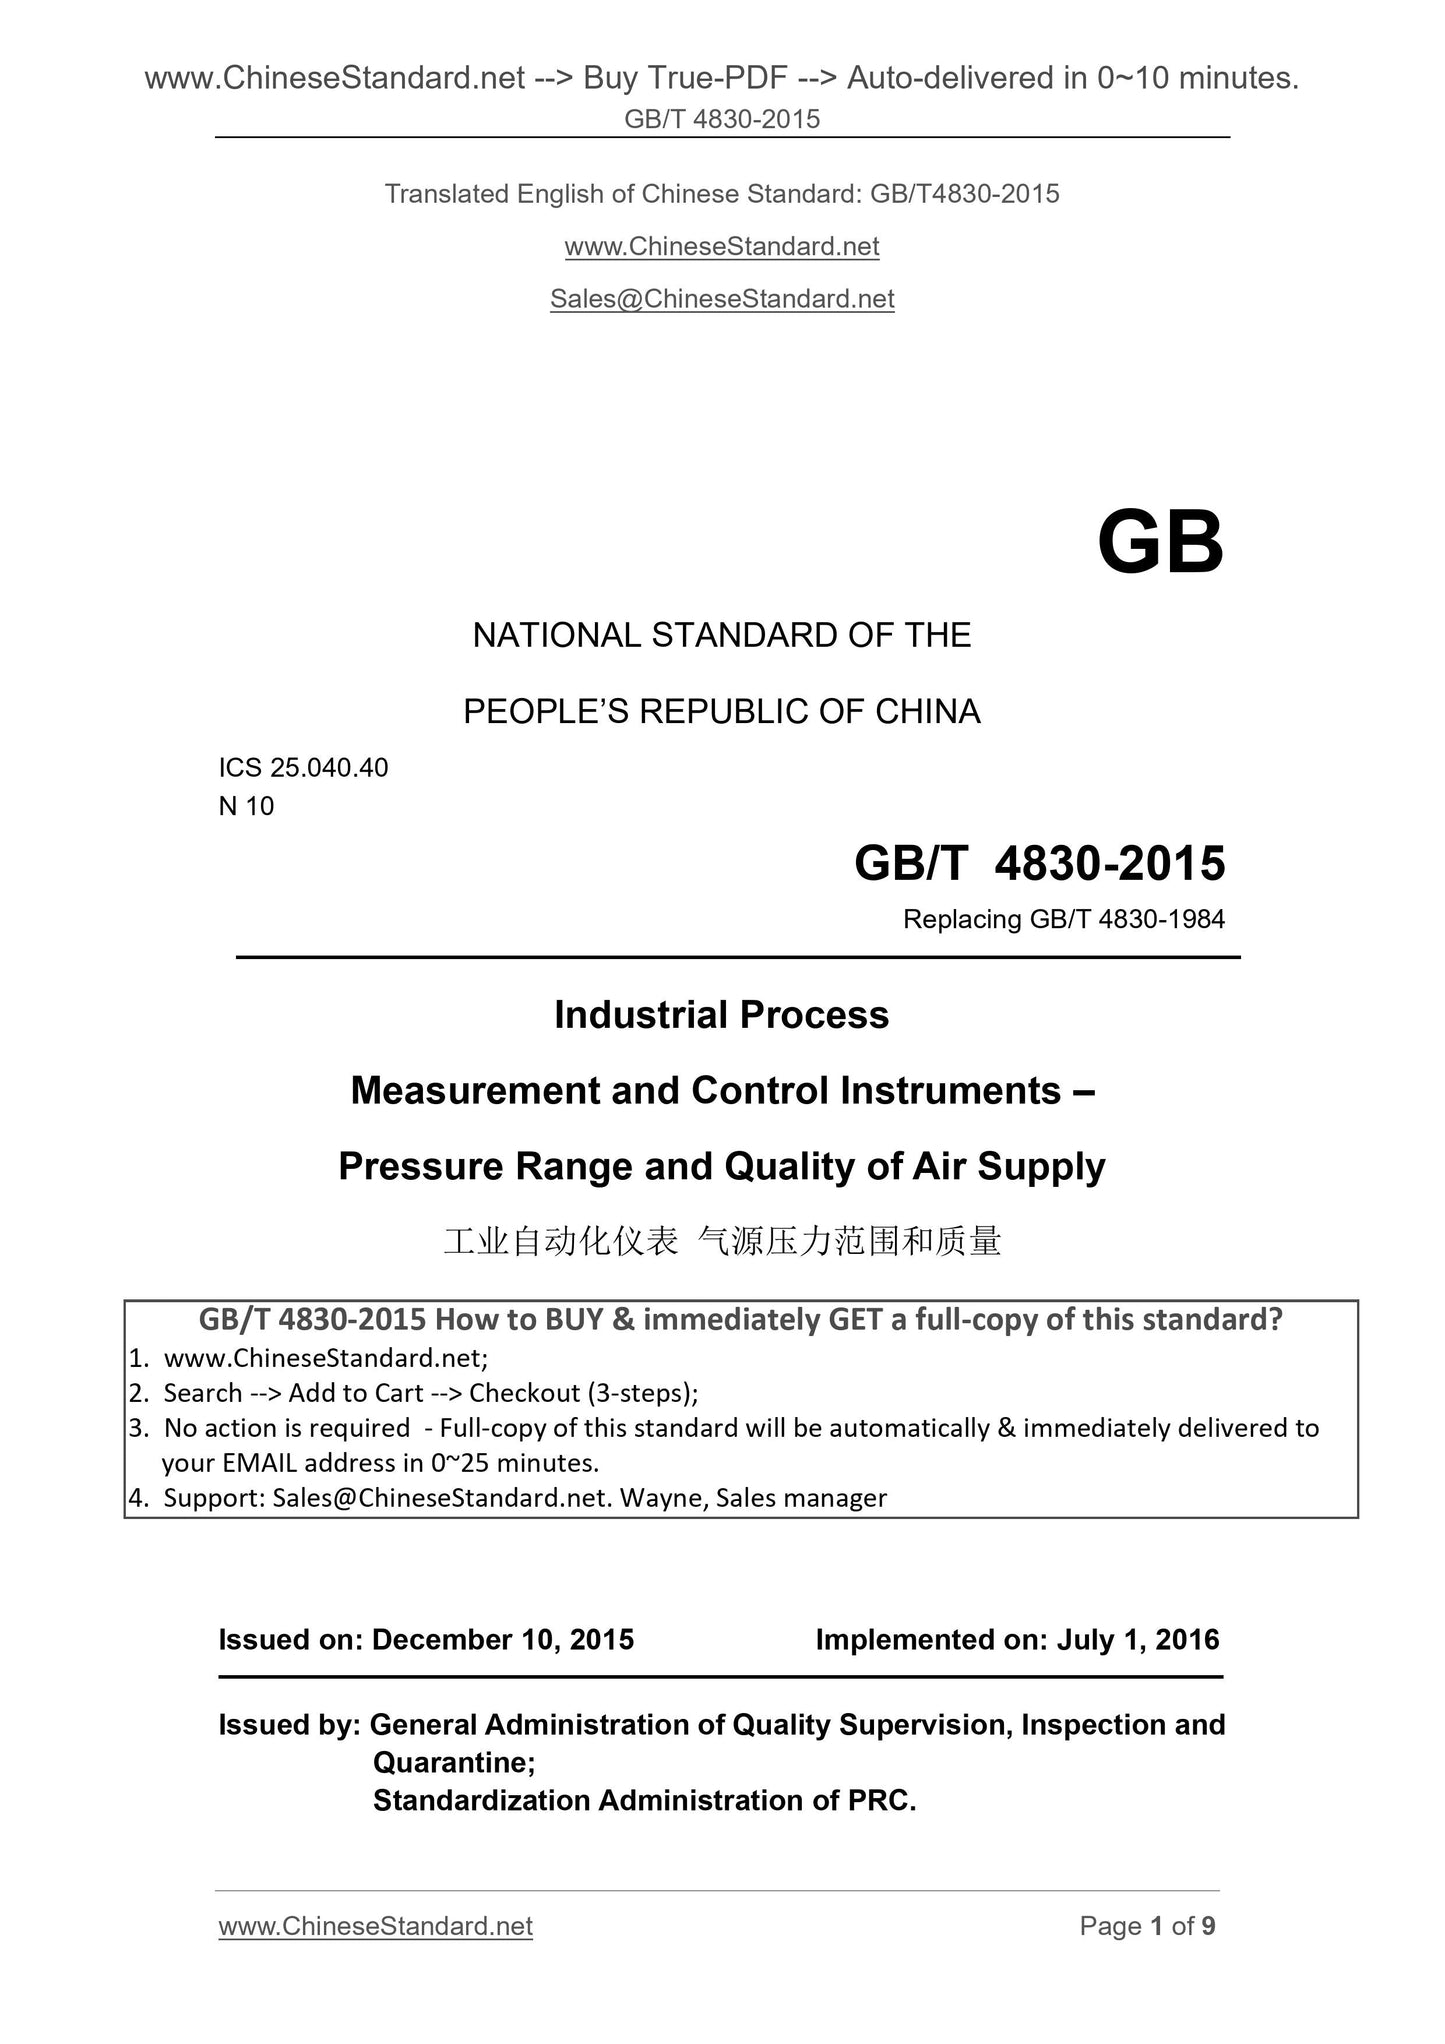 GB/T 4830-2015 Page 1